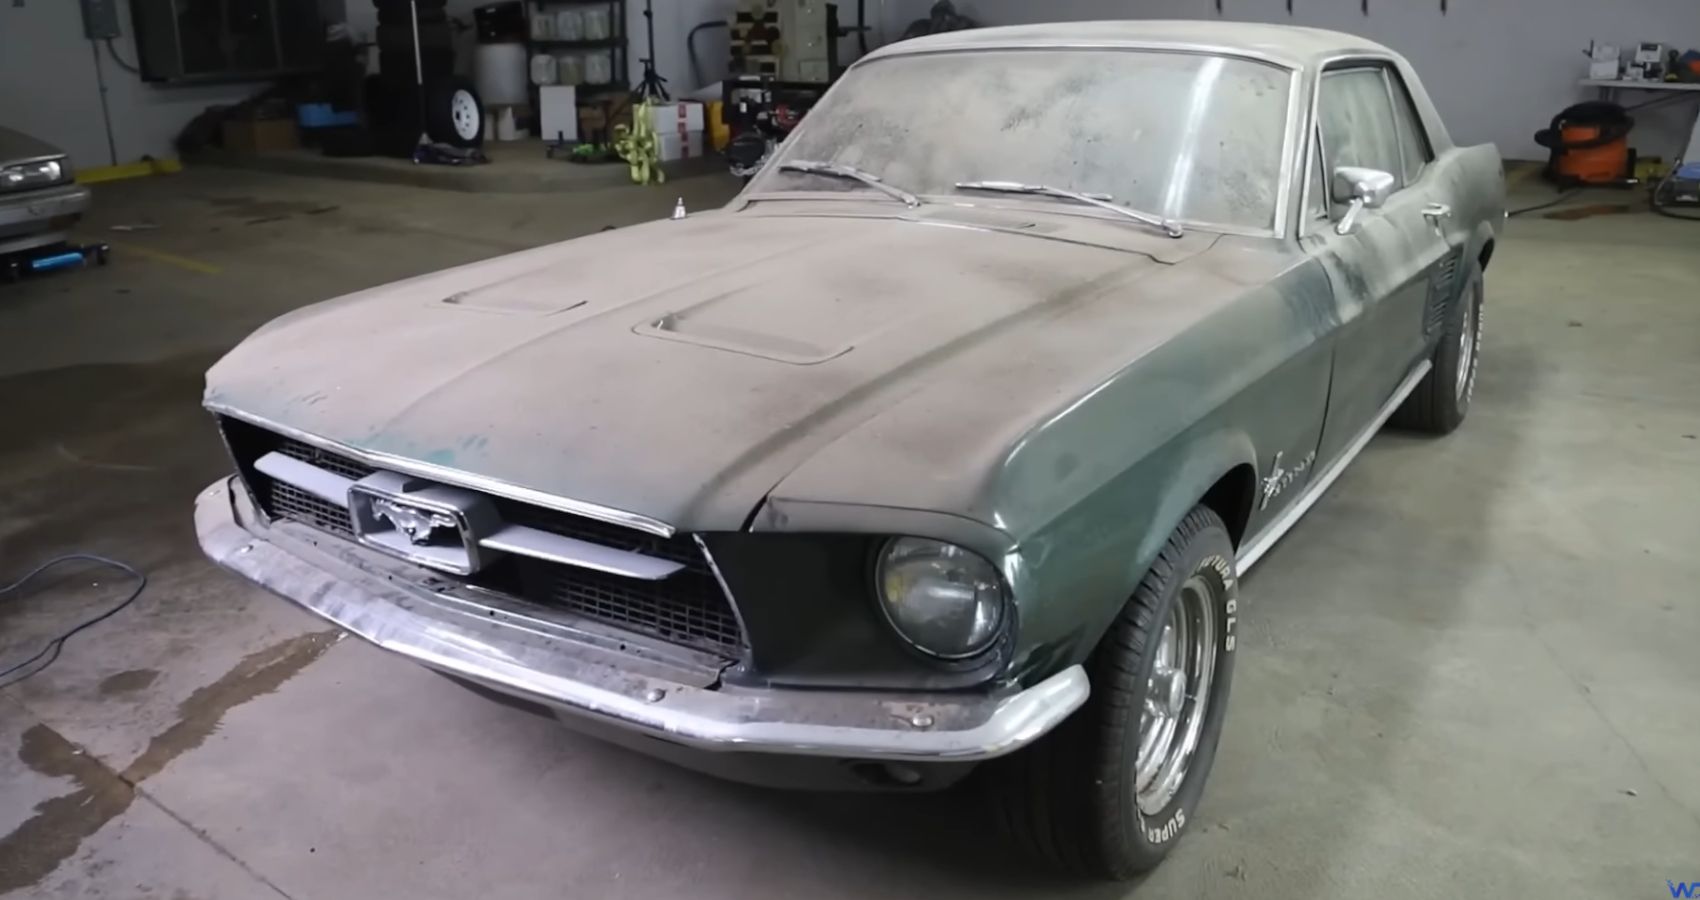 Watch This Abandoned Ford Mustang 289 Finally Rescued And Receive Some TLC